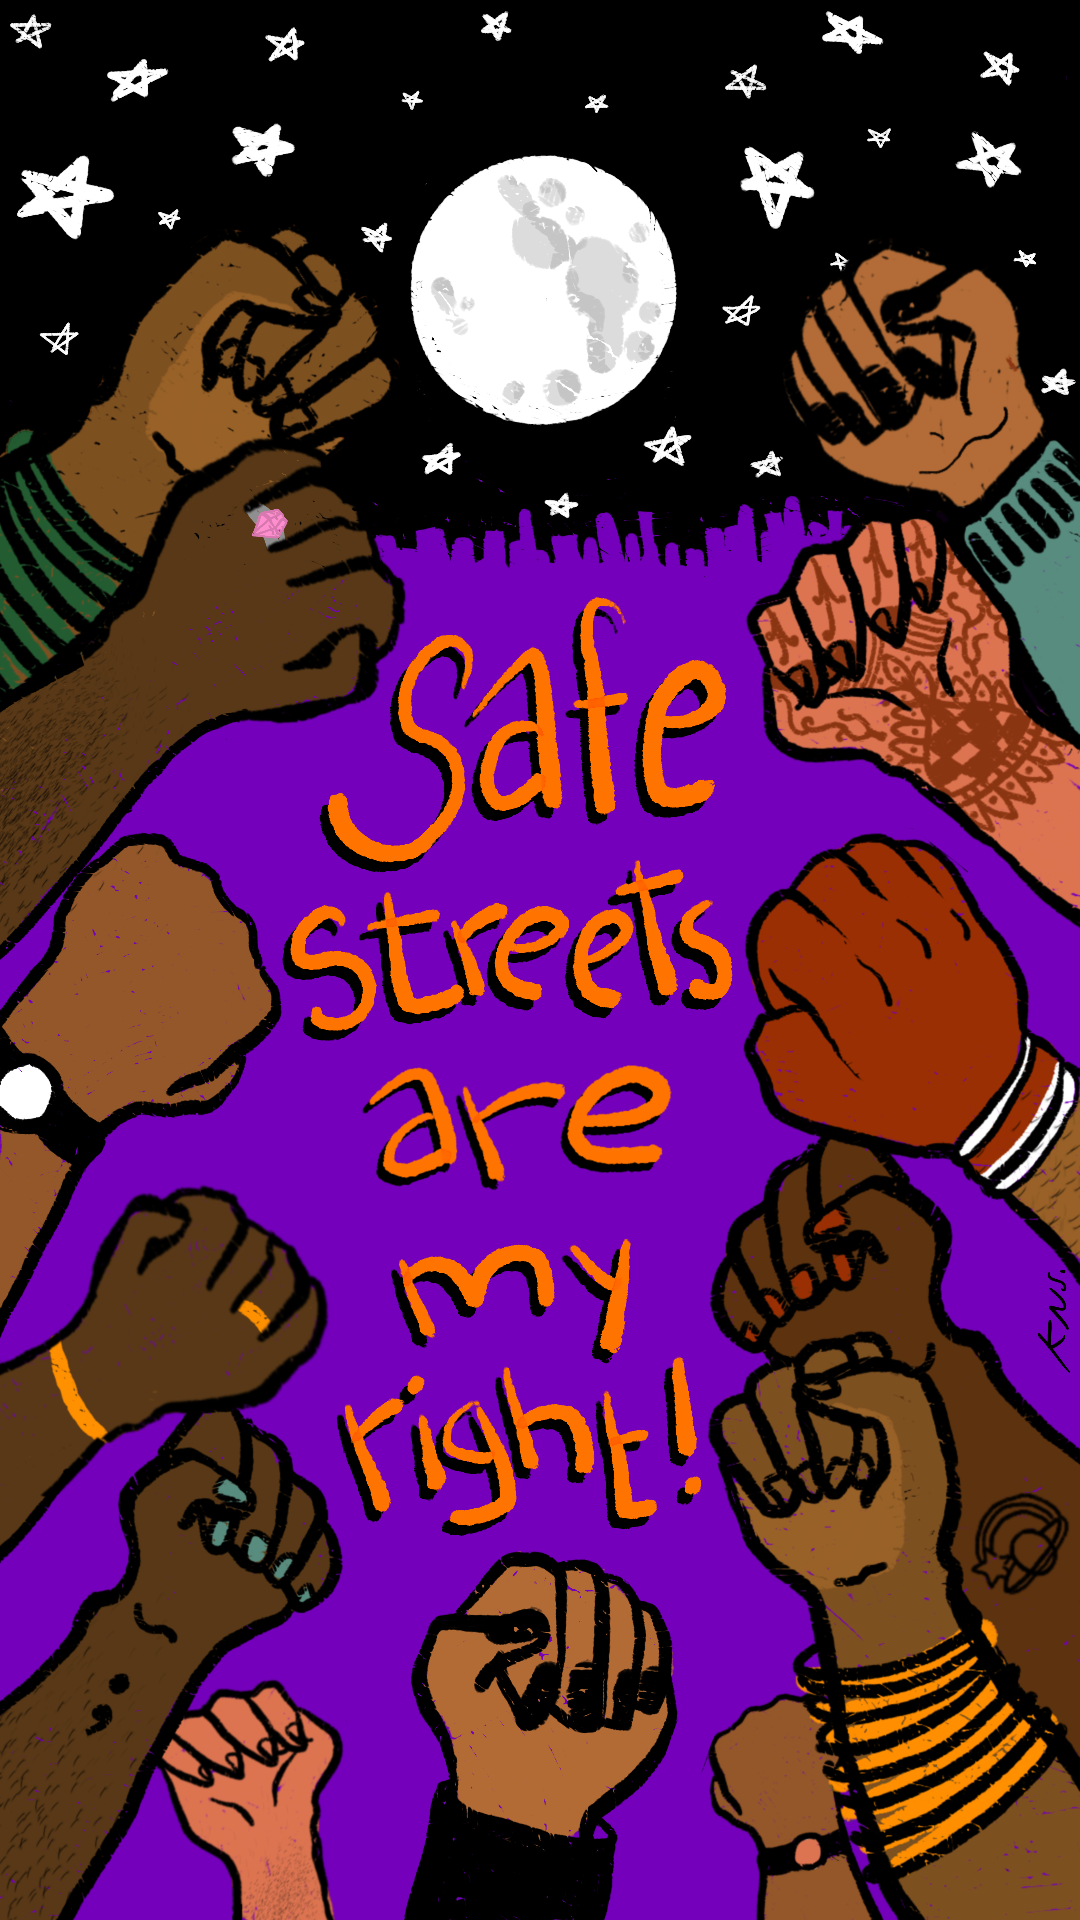 Safe street are my right banner image